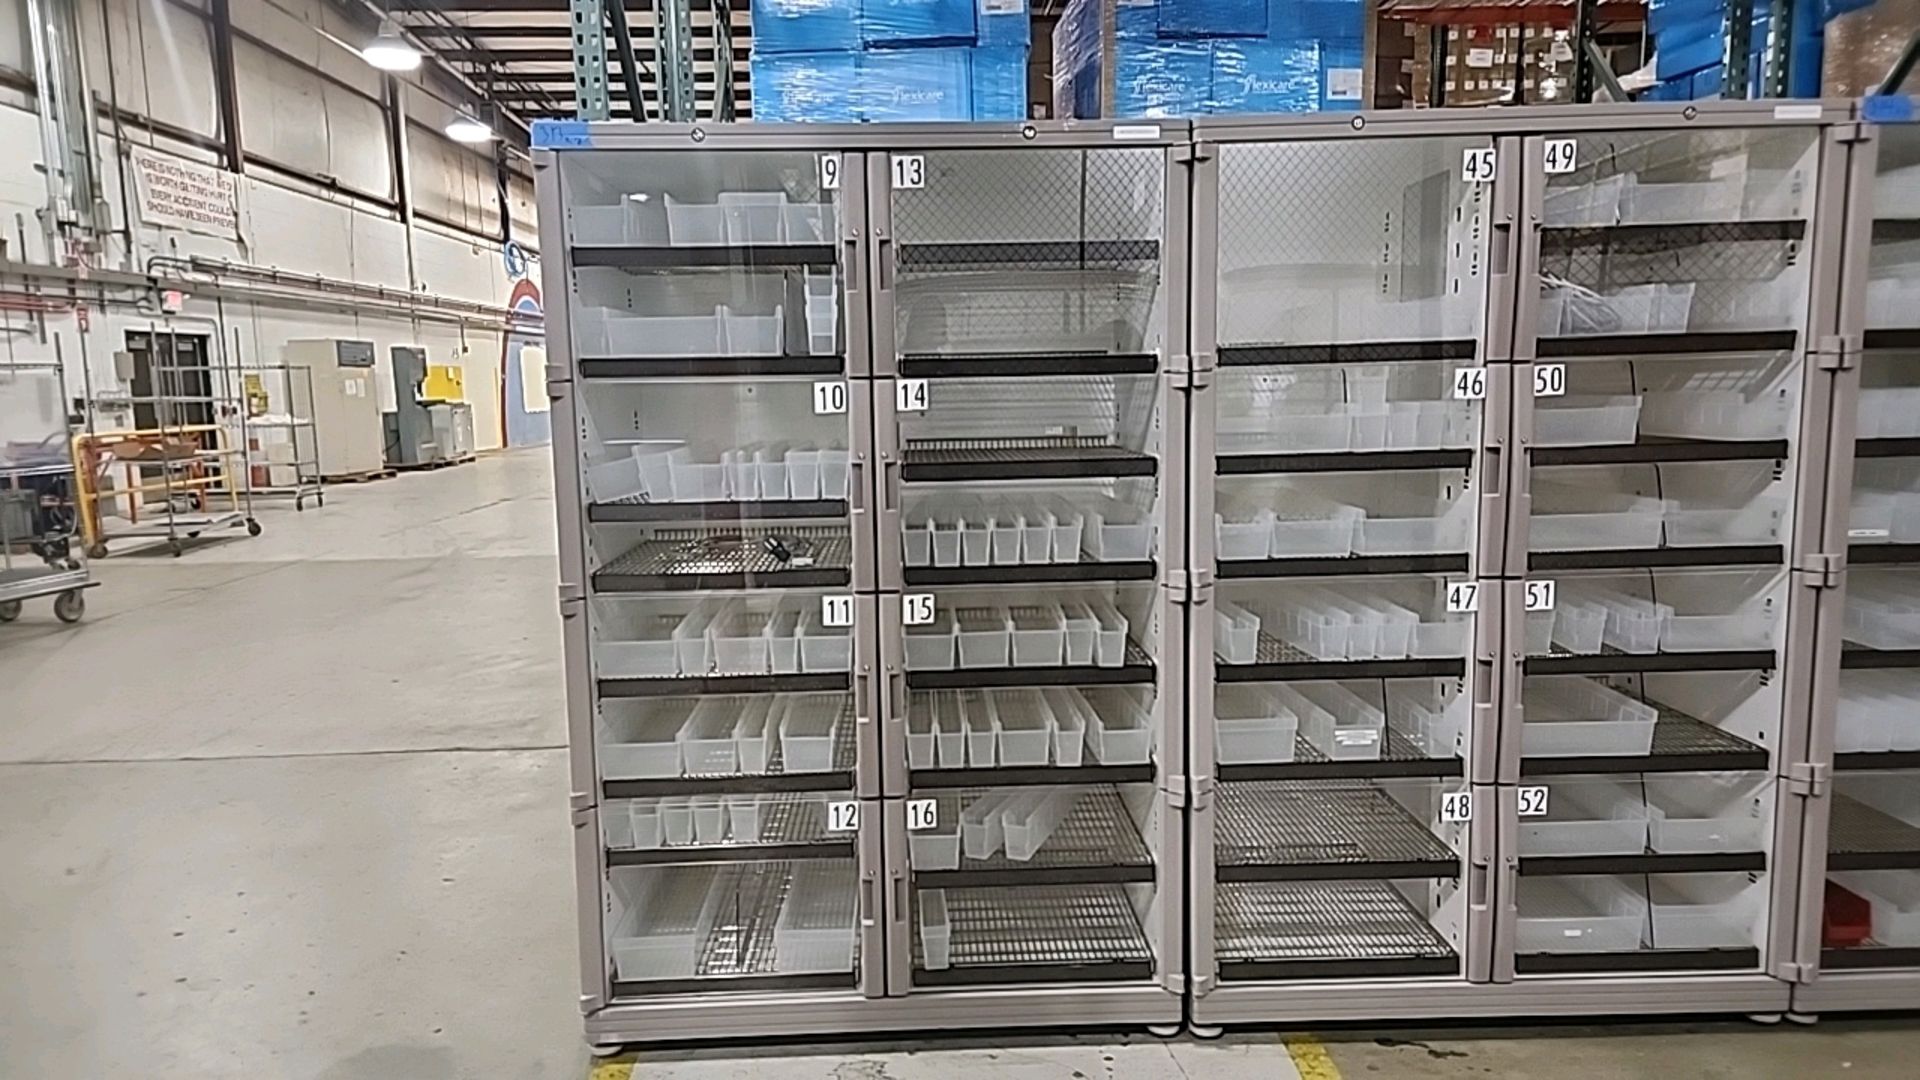 BD PYXIS 347 UNIVERSAL 601 SUPPLY CABINET, 2-DOOR, QTY(2) LOCATION: 100 GOLDEN DR. CODE: 313